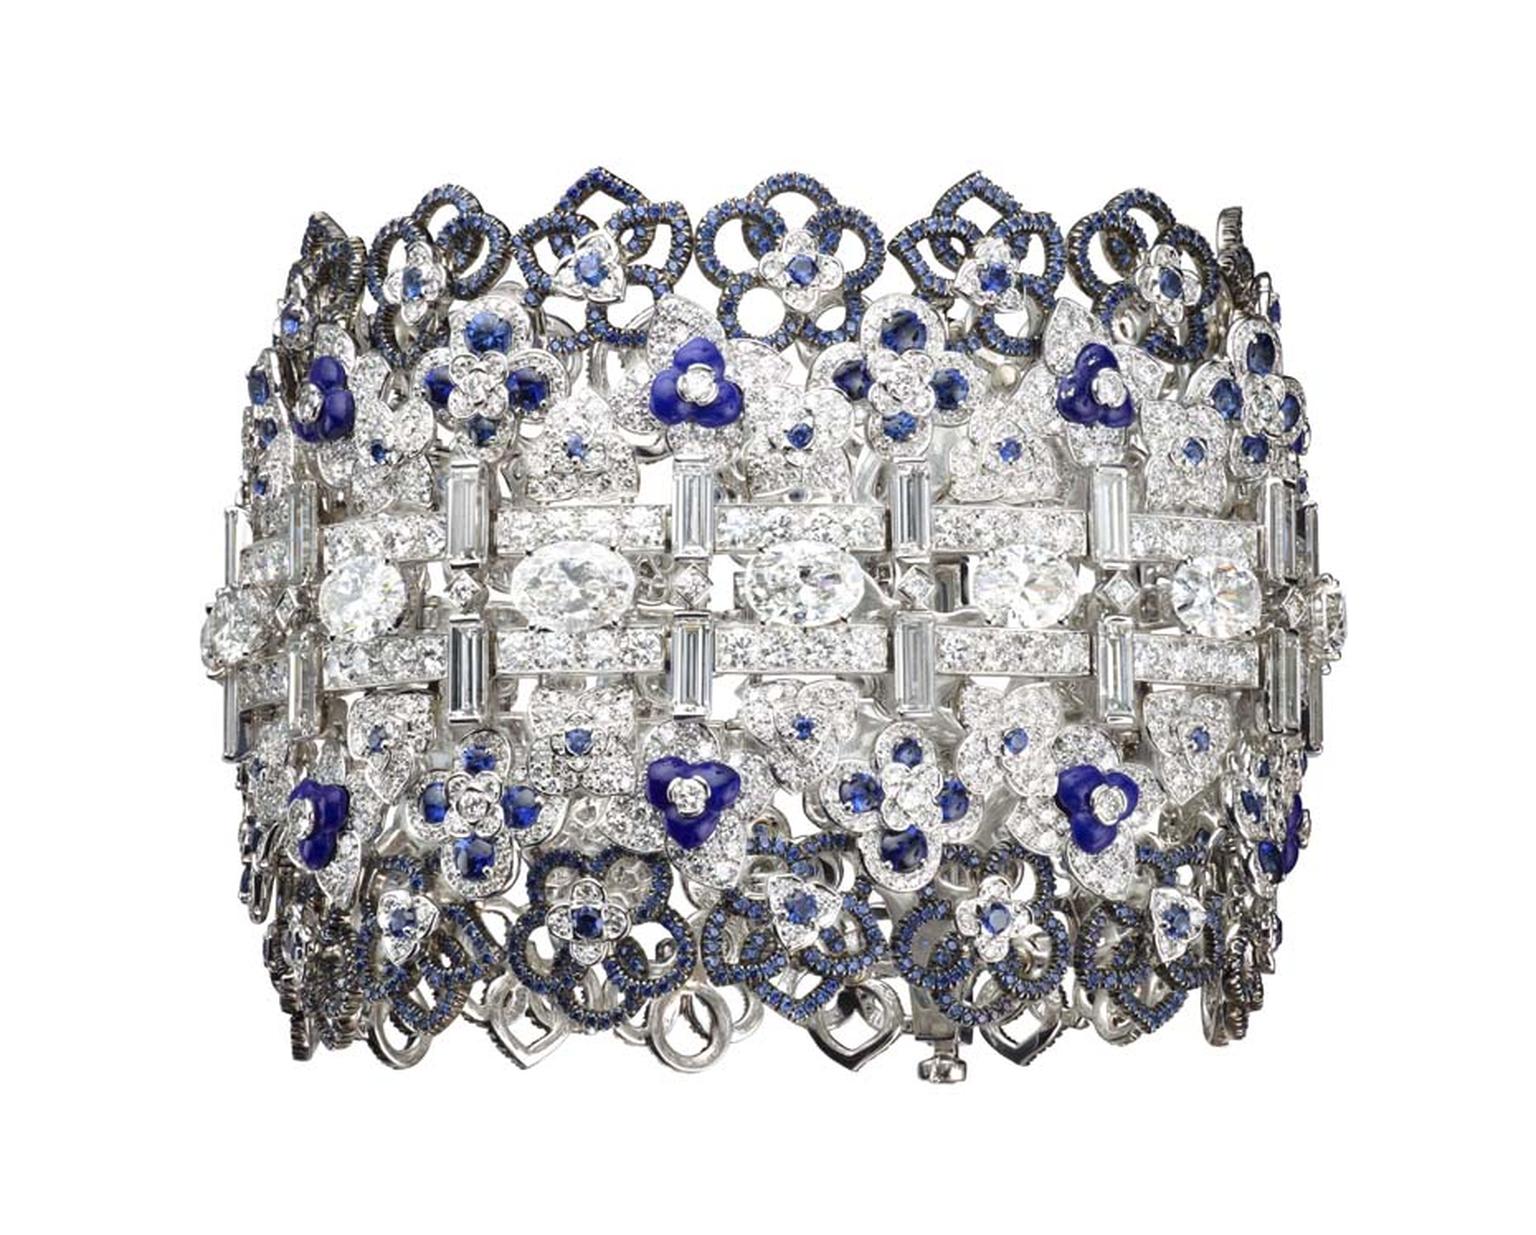 Chaumet Hortensia bracelet in white gold with diamonds, lapis lazuli and sapphires.